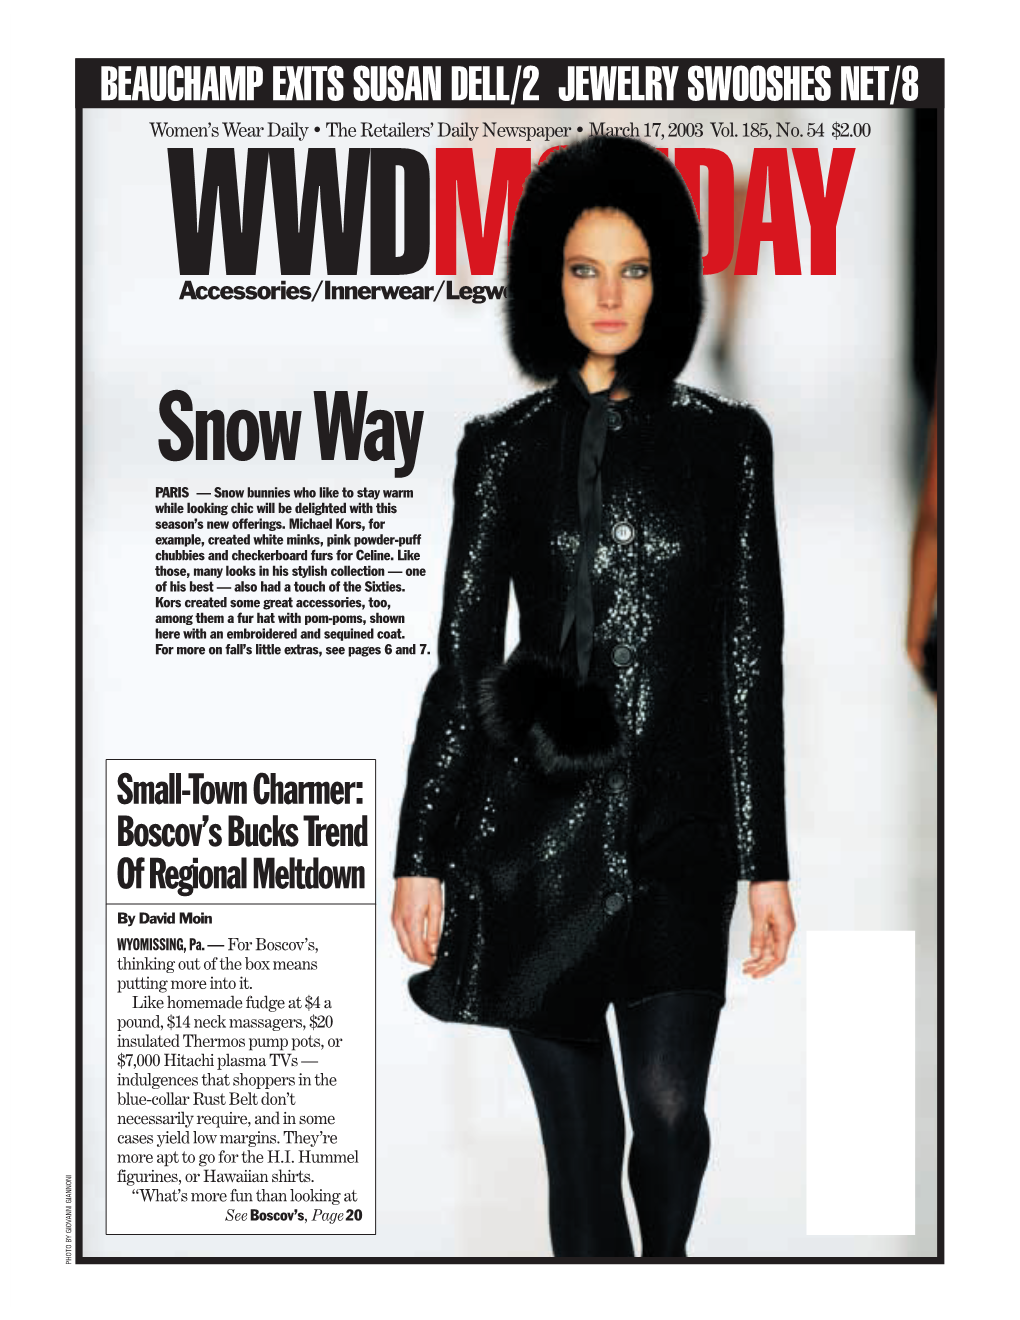 Snow Way PARIS — Snow Bunnies Who Like to Stay Warm While Looking Chic Will Be Delighted with This Season’S New Offerings